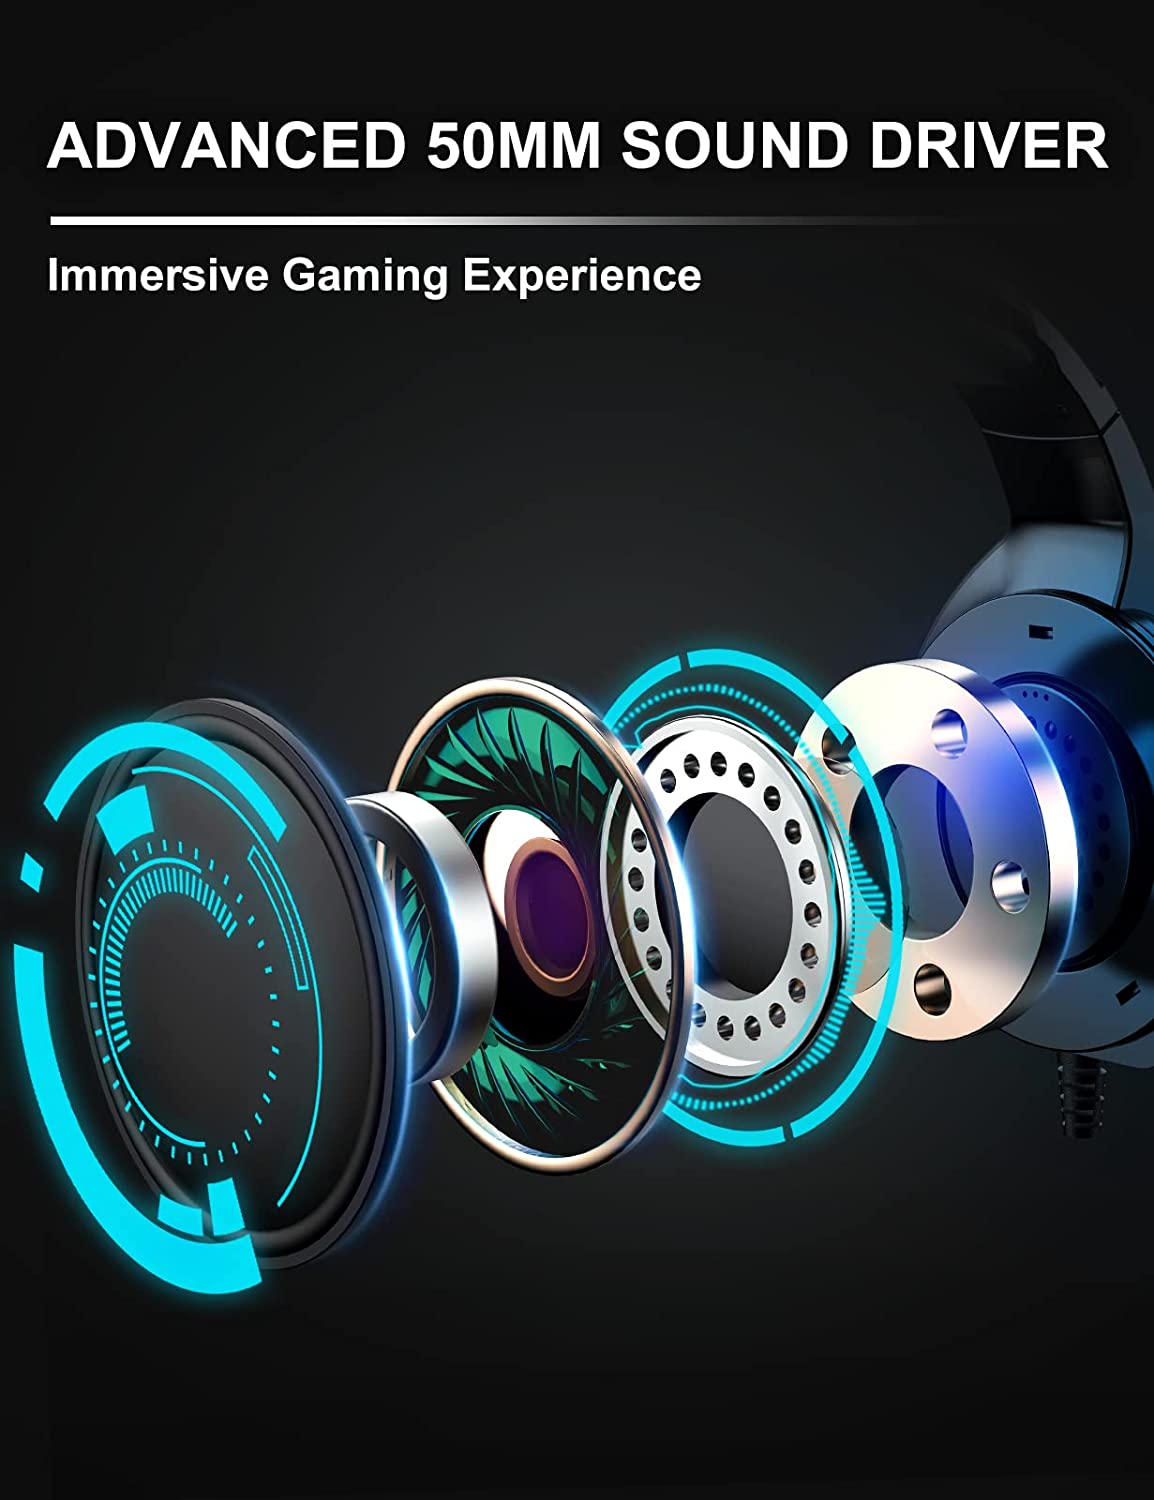 Gaming Headset with Microphone, Wired Headset with RGB Light. (Black)